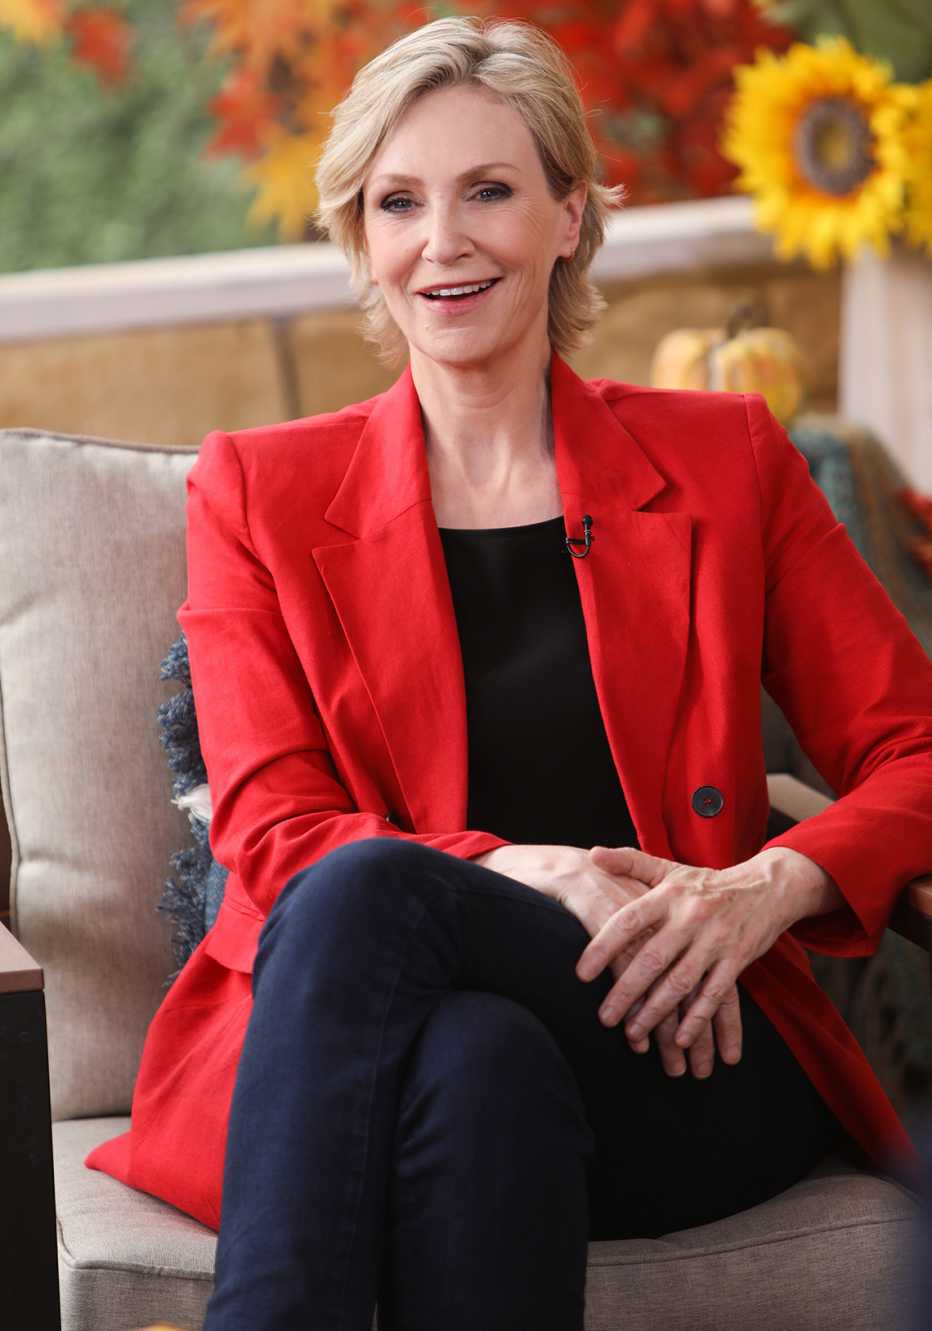 Actress Jane Lynch sitting in a chair in a fall-themed background setting